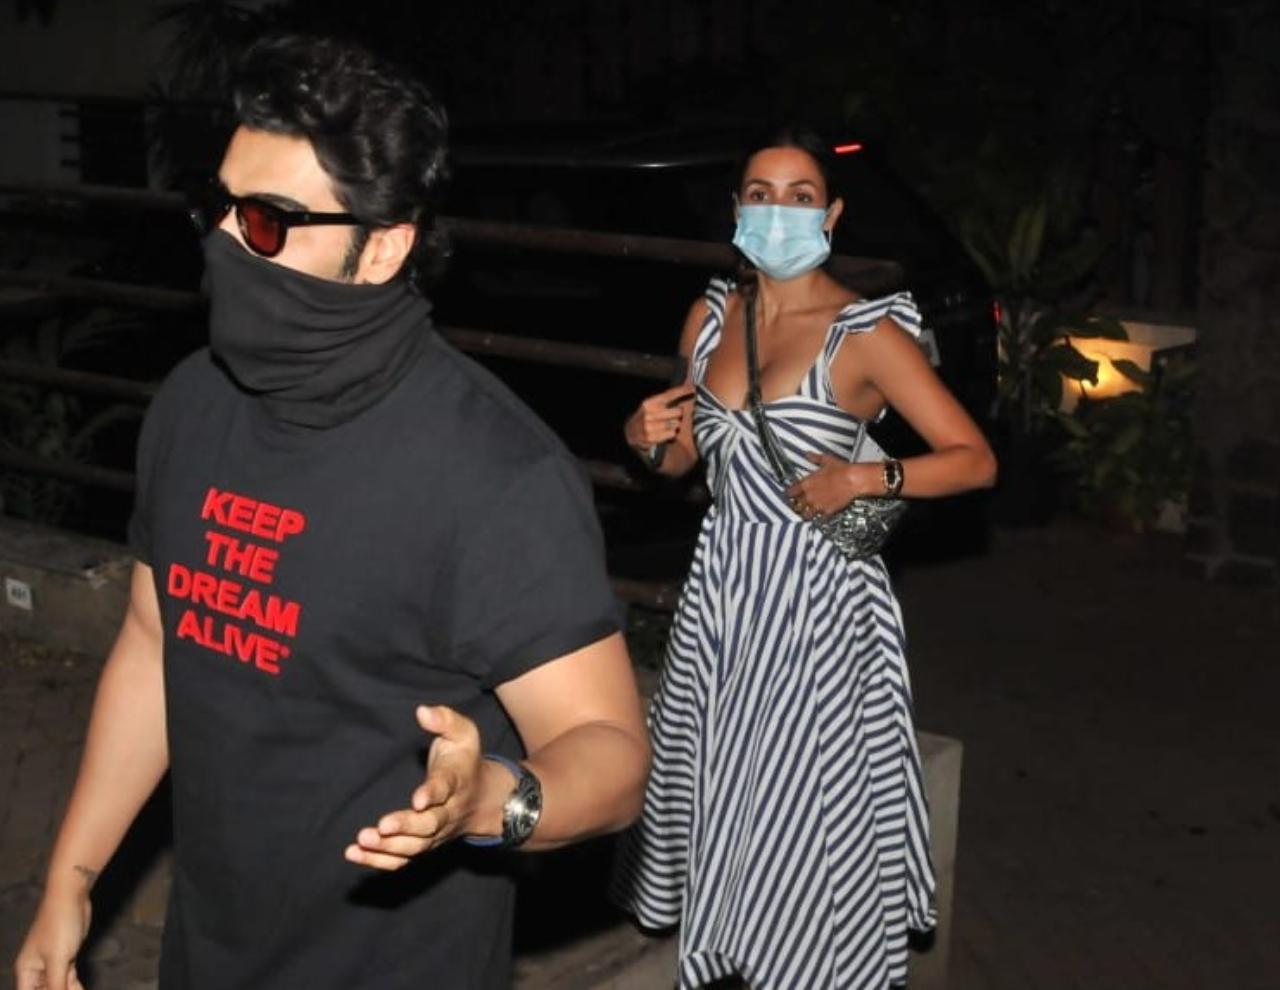 Malaika Arora was clicked with her boyfriend Arjun Kapoor. Malaika looked chic in her white checkered dress while Arjun opted for a black t-shirt and jeans for the outing.